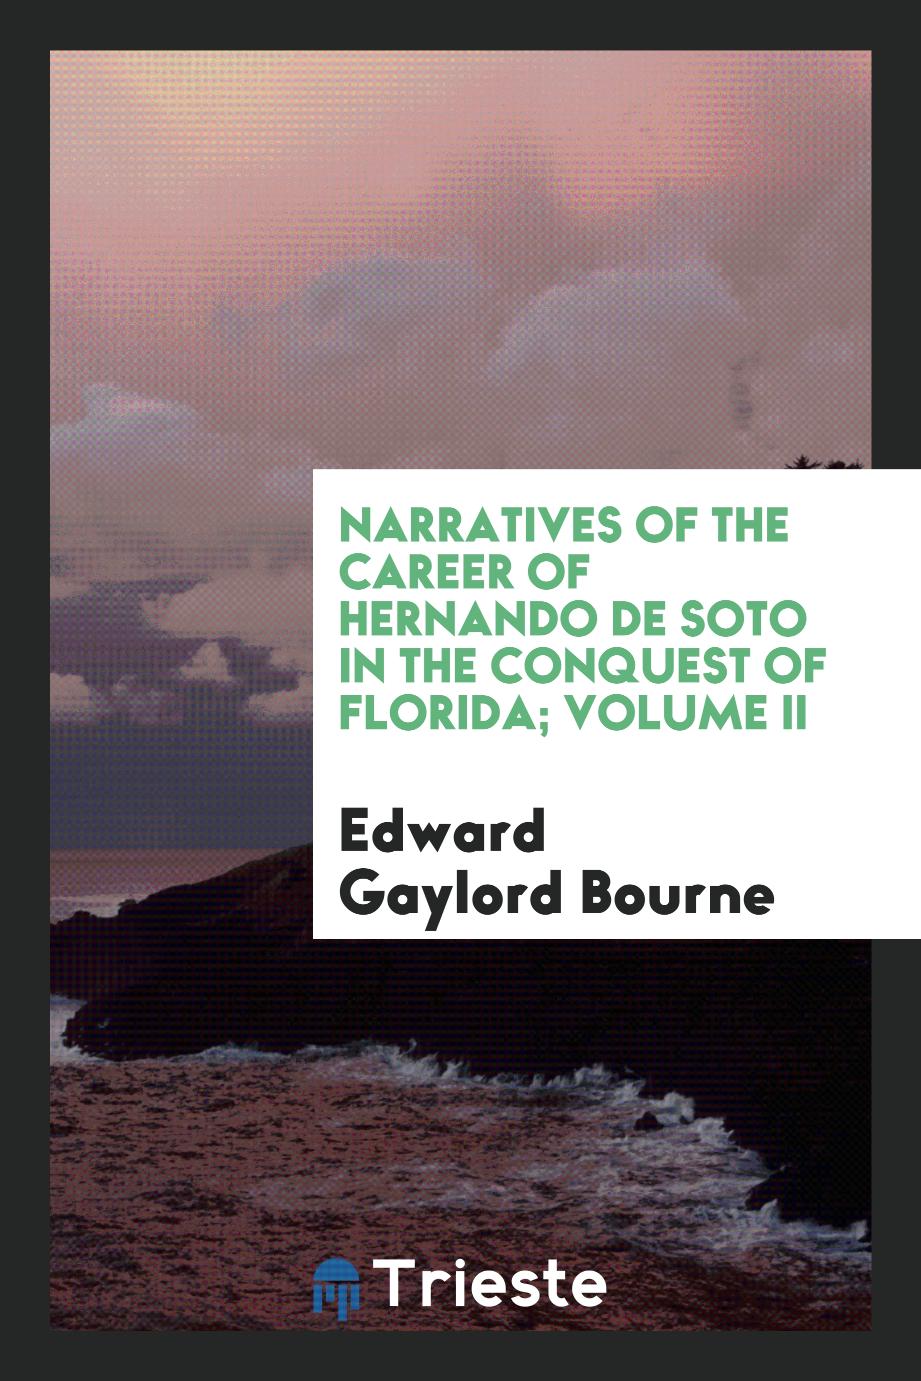 Narratives of the career of Hernando de Soto in the conquest of Florida; Volume II